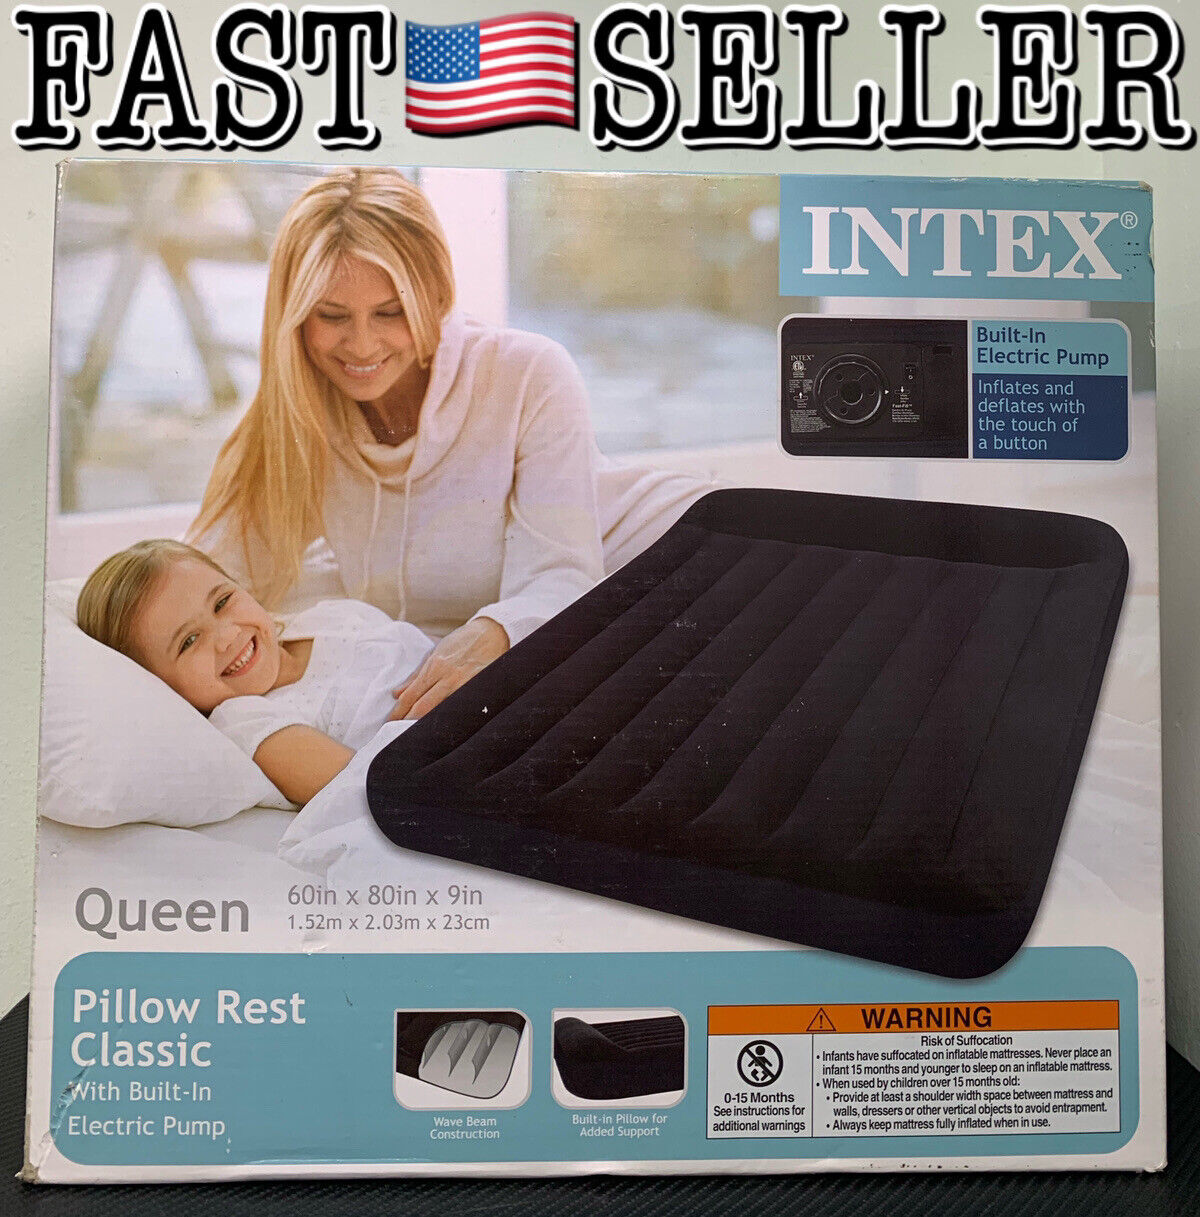 Intex Classic Queen Air bed With Built-In Eletric Pump And Pillow Rest - NEW